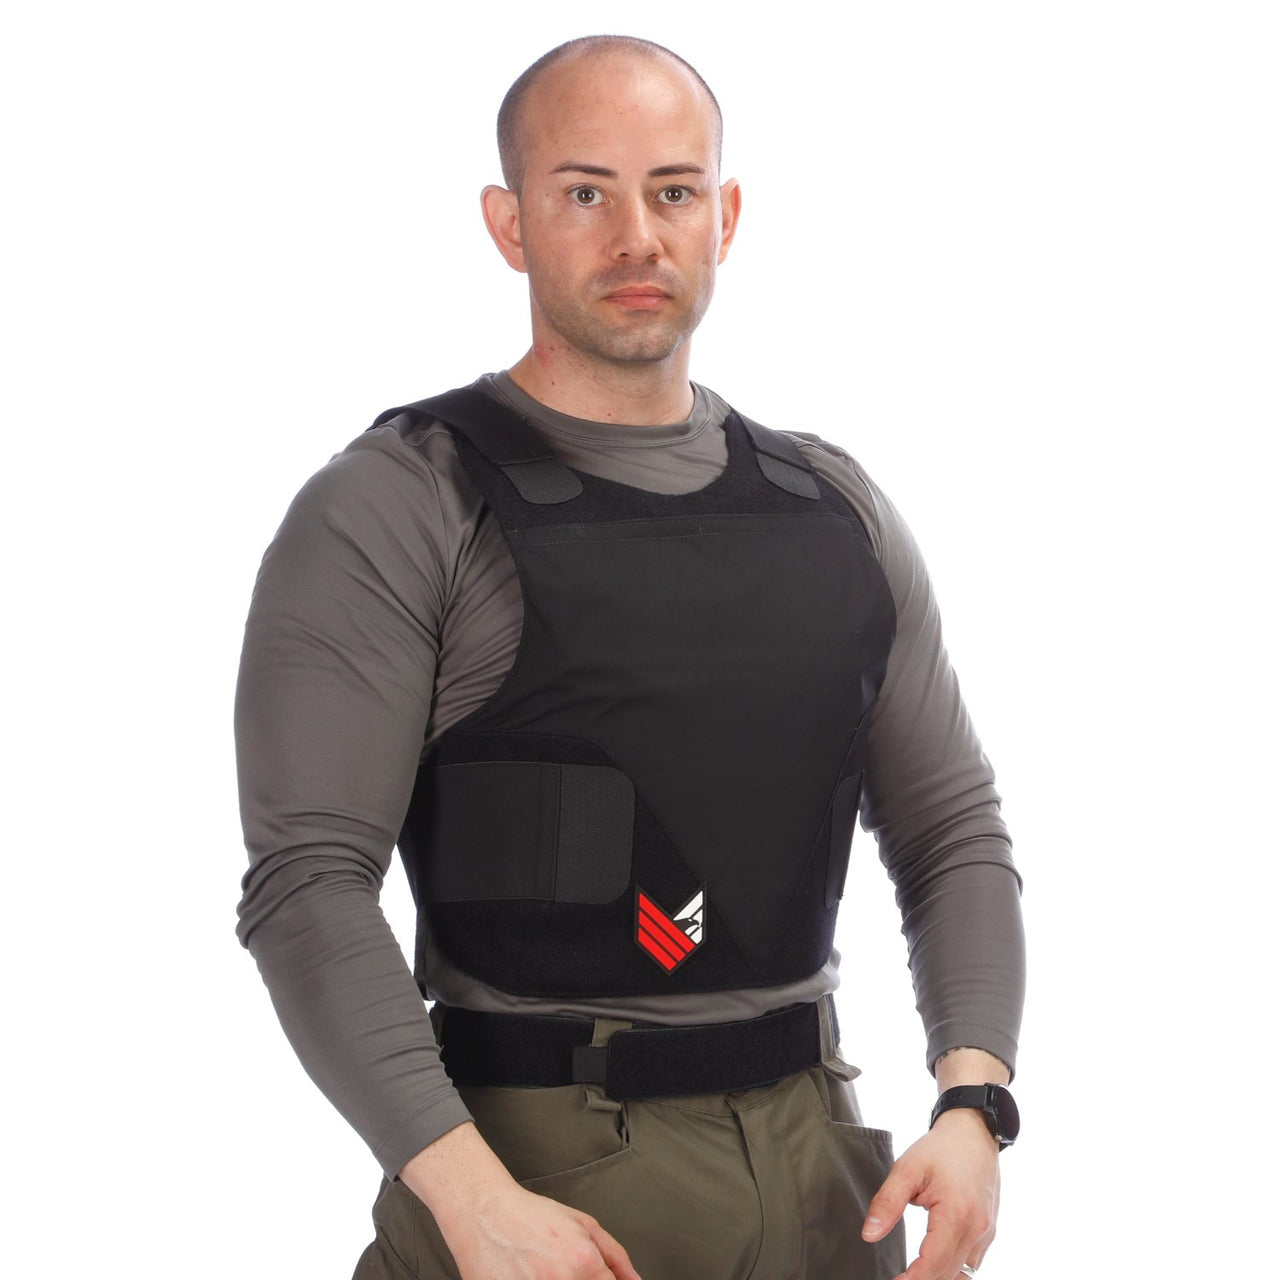 A man wearing a Body Armor Direct All American Concealable Enhanced Multi-Threat Vest.